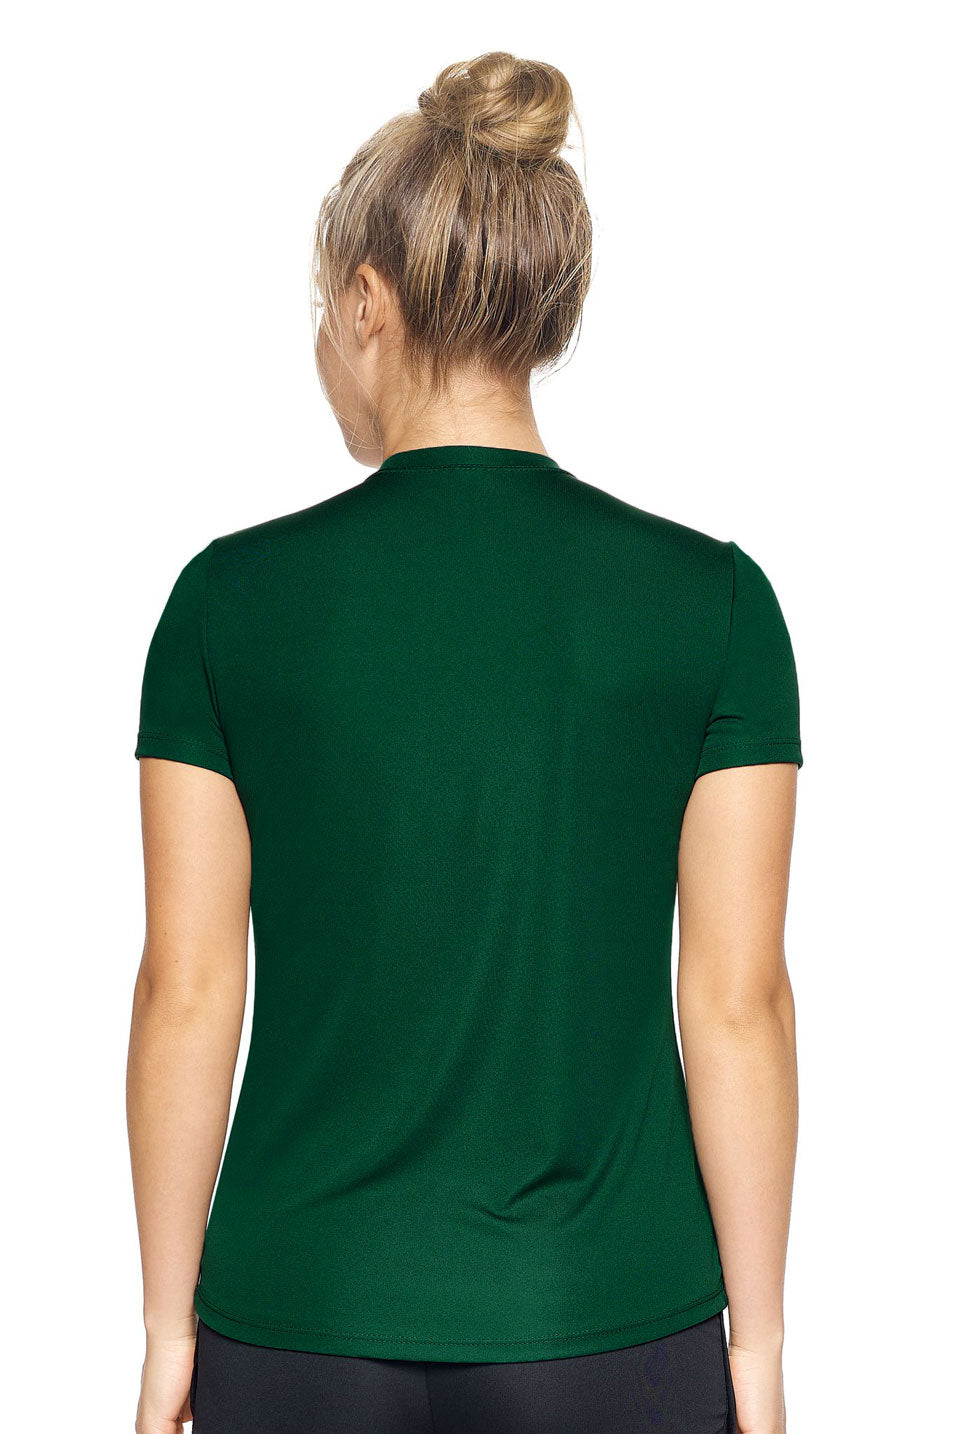 Expert Brand Wholesale Women's DriMax Crewneck Performance Tee Made in USA Forest Green Image 3#forest